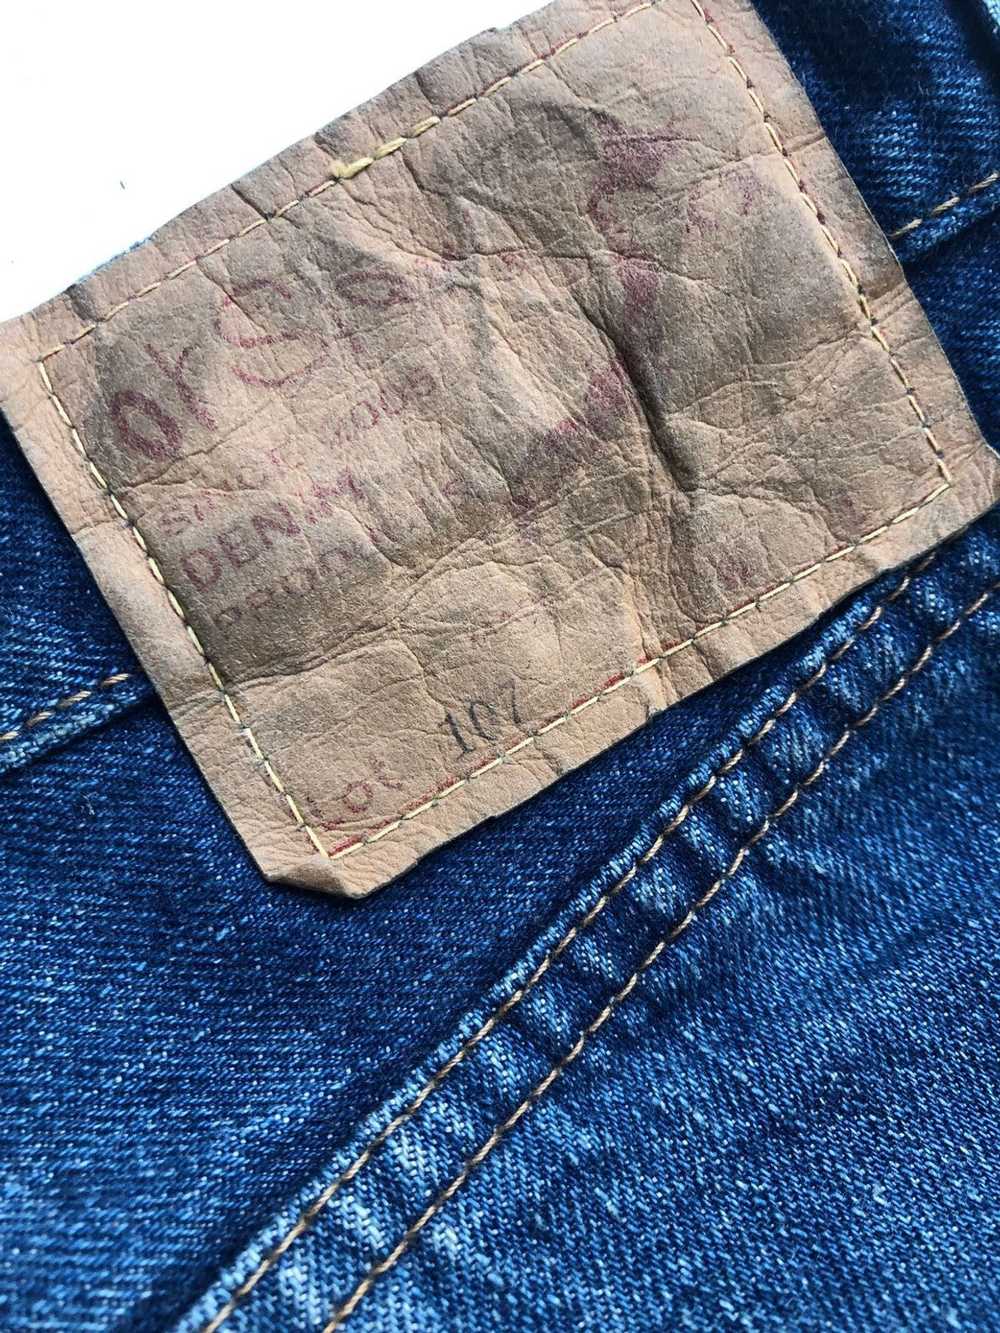 Japanese Brand × Orslow Orslow jeans selvedge - image 8